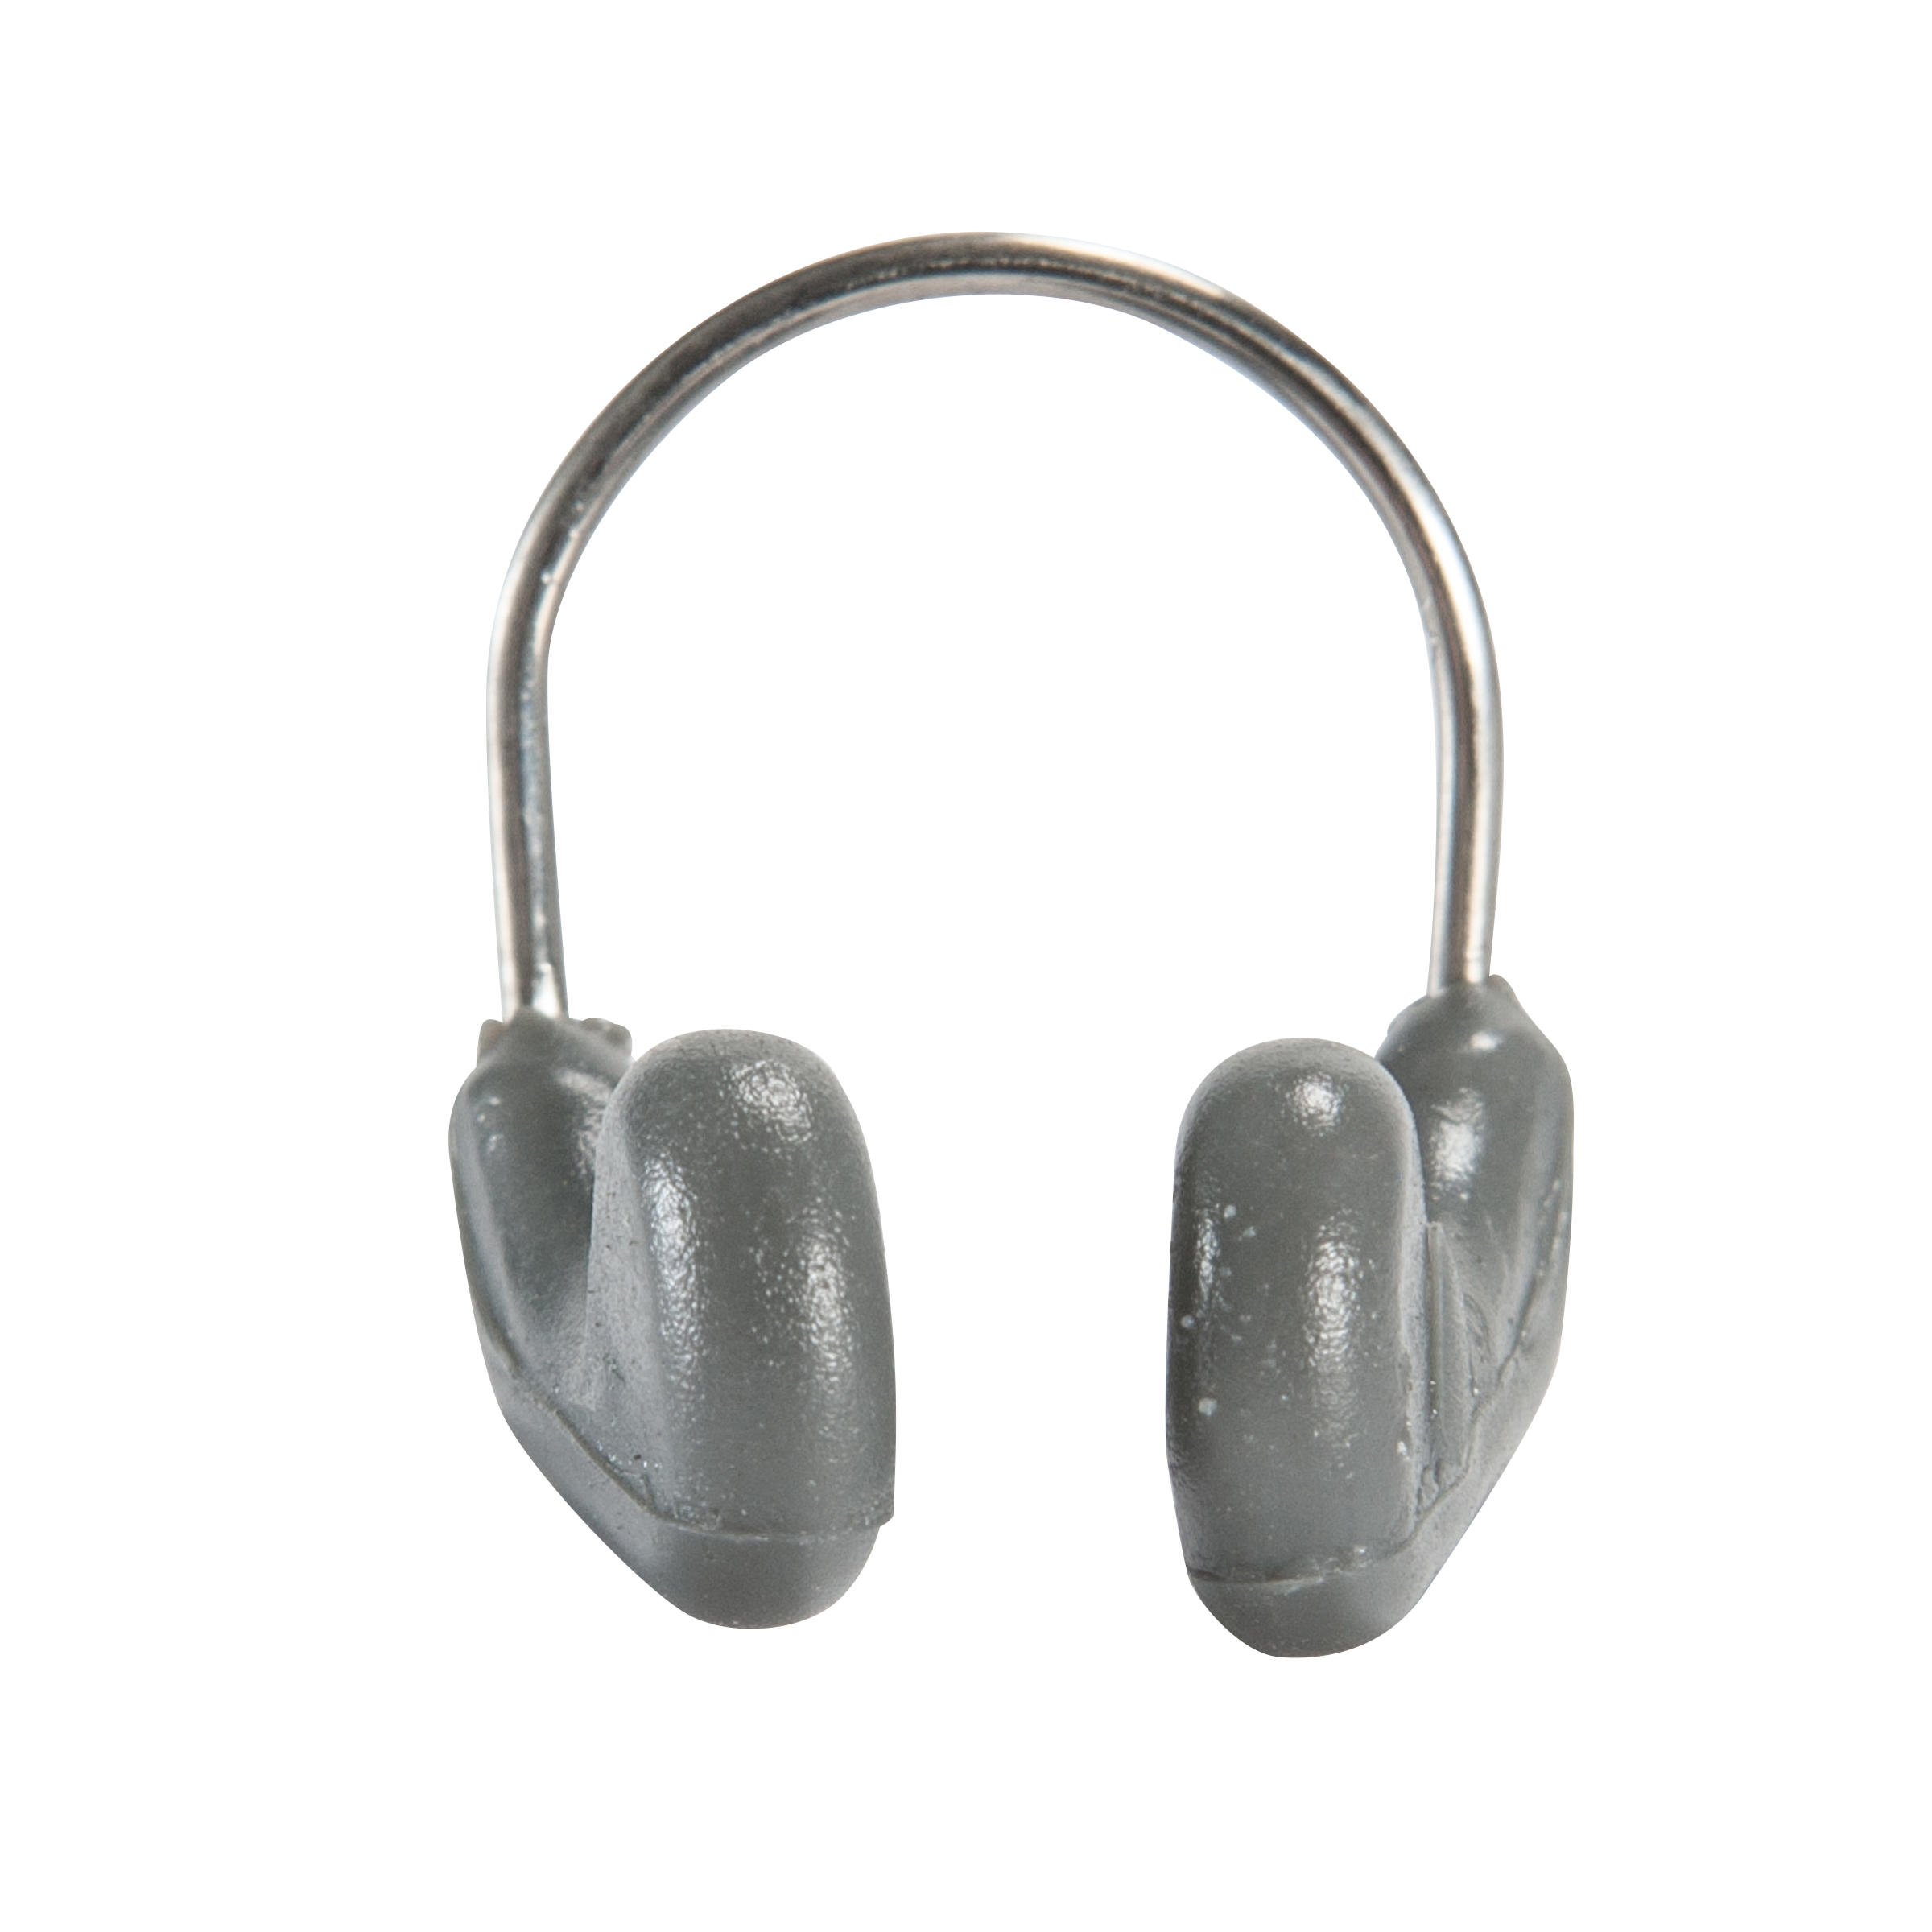 SPEEDO COMPETITION NOSE CLIP - GREY BLUE 4/10